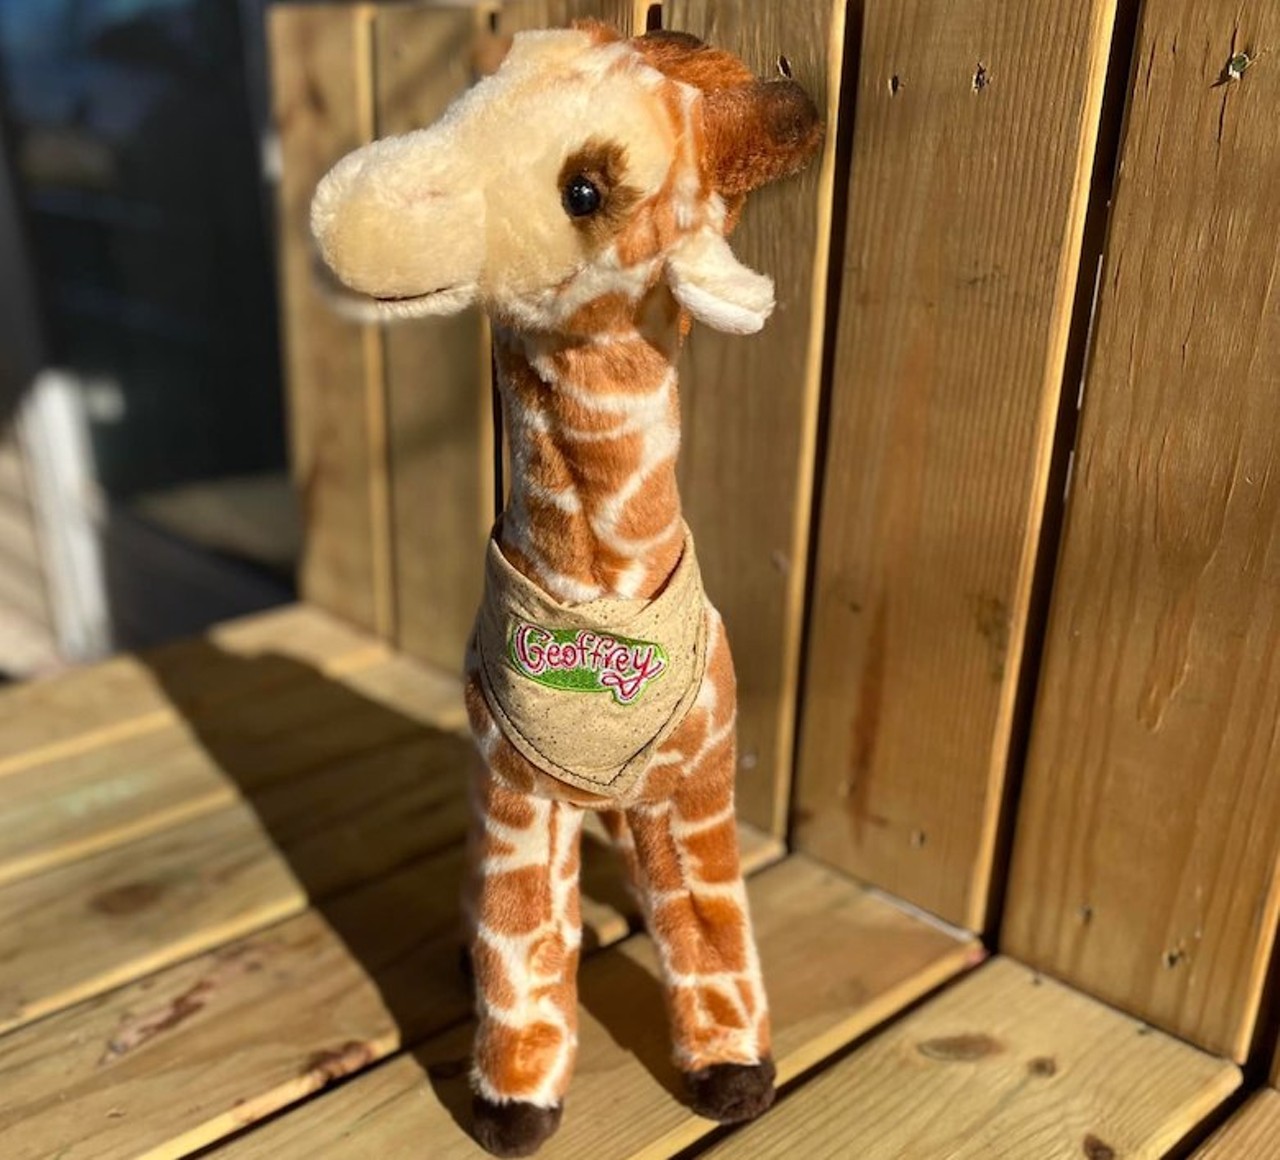 Found in Bowling Green, Kentucky
&#148;Found 12/11/21 in Bowling Green KY. Couple hours after we were hit. Located in debris in the Springhill area. I cleaned Geoffrey and hoping to find its owner.&#148;
Photo via Brandy Lindsey